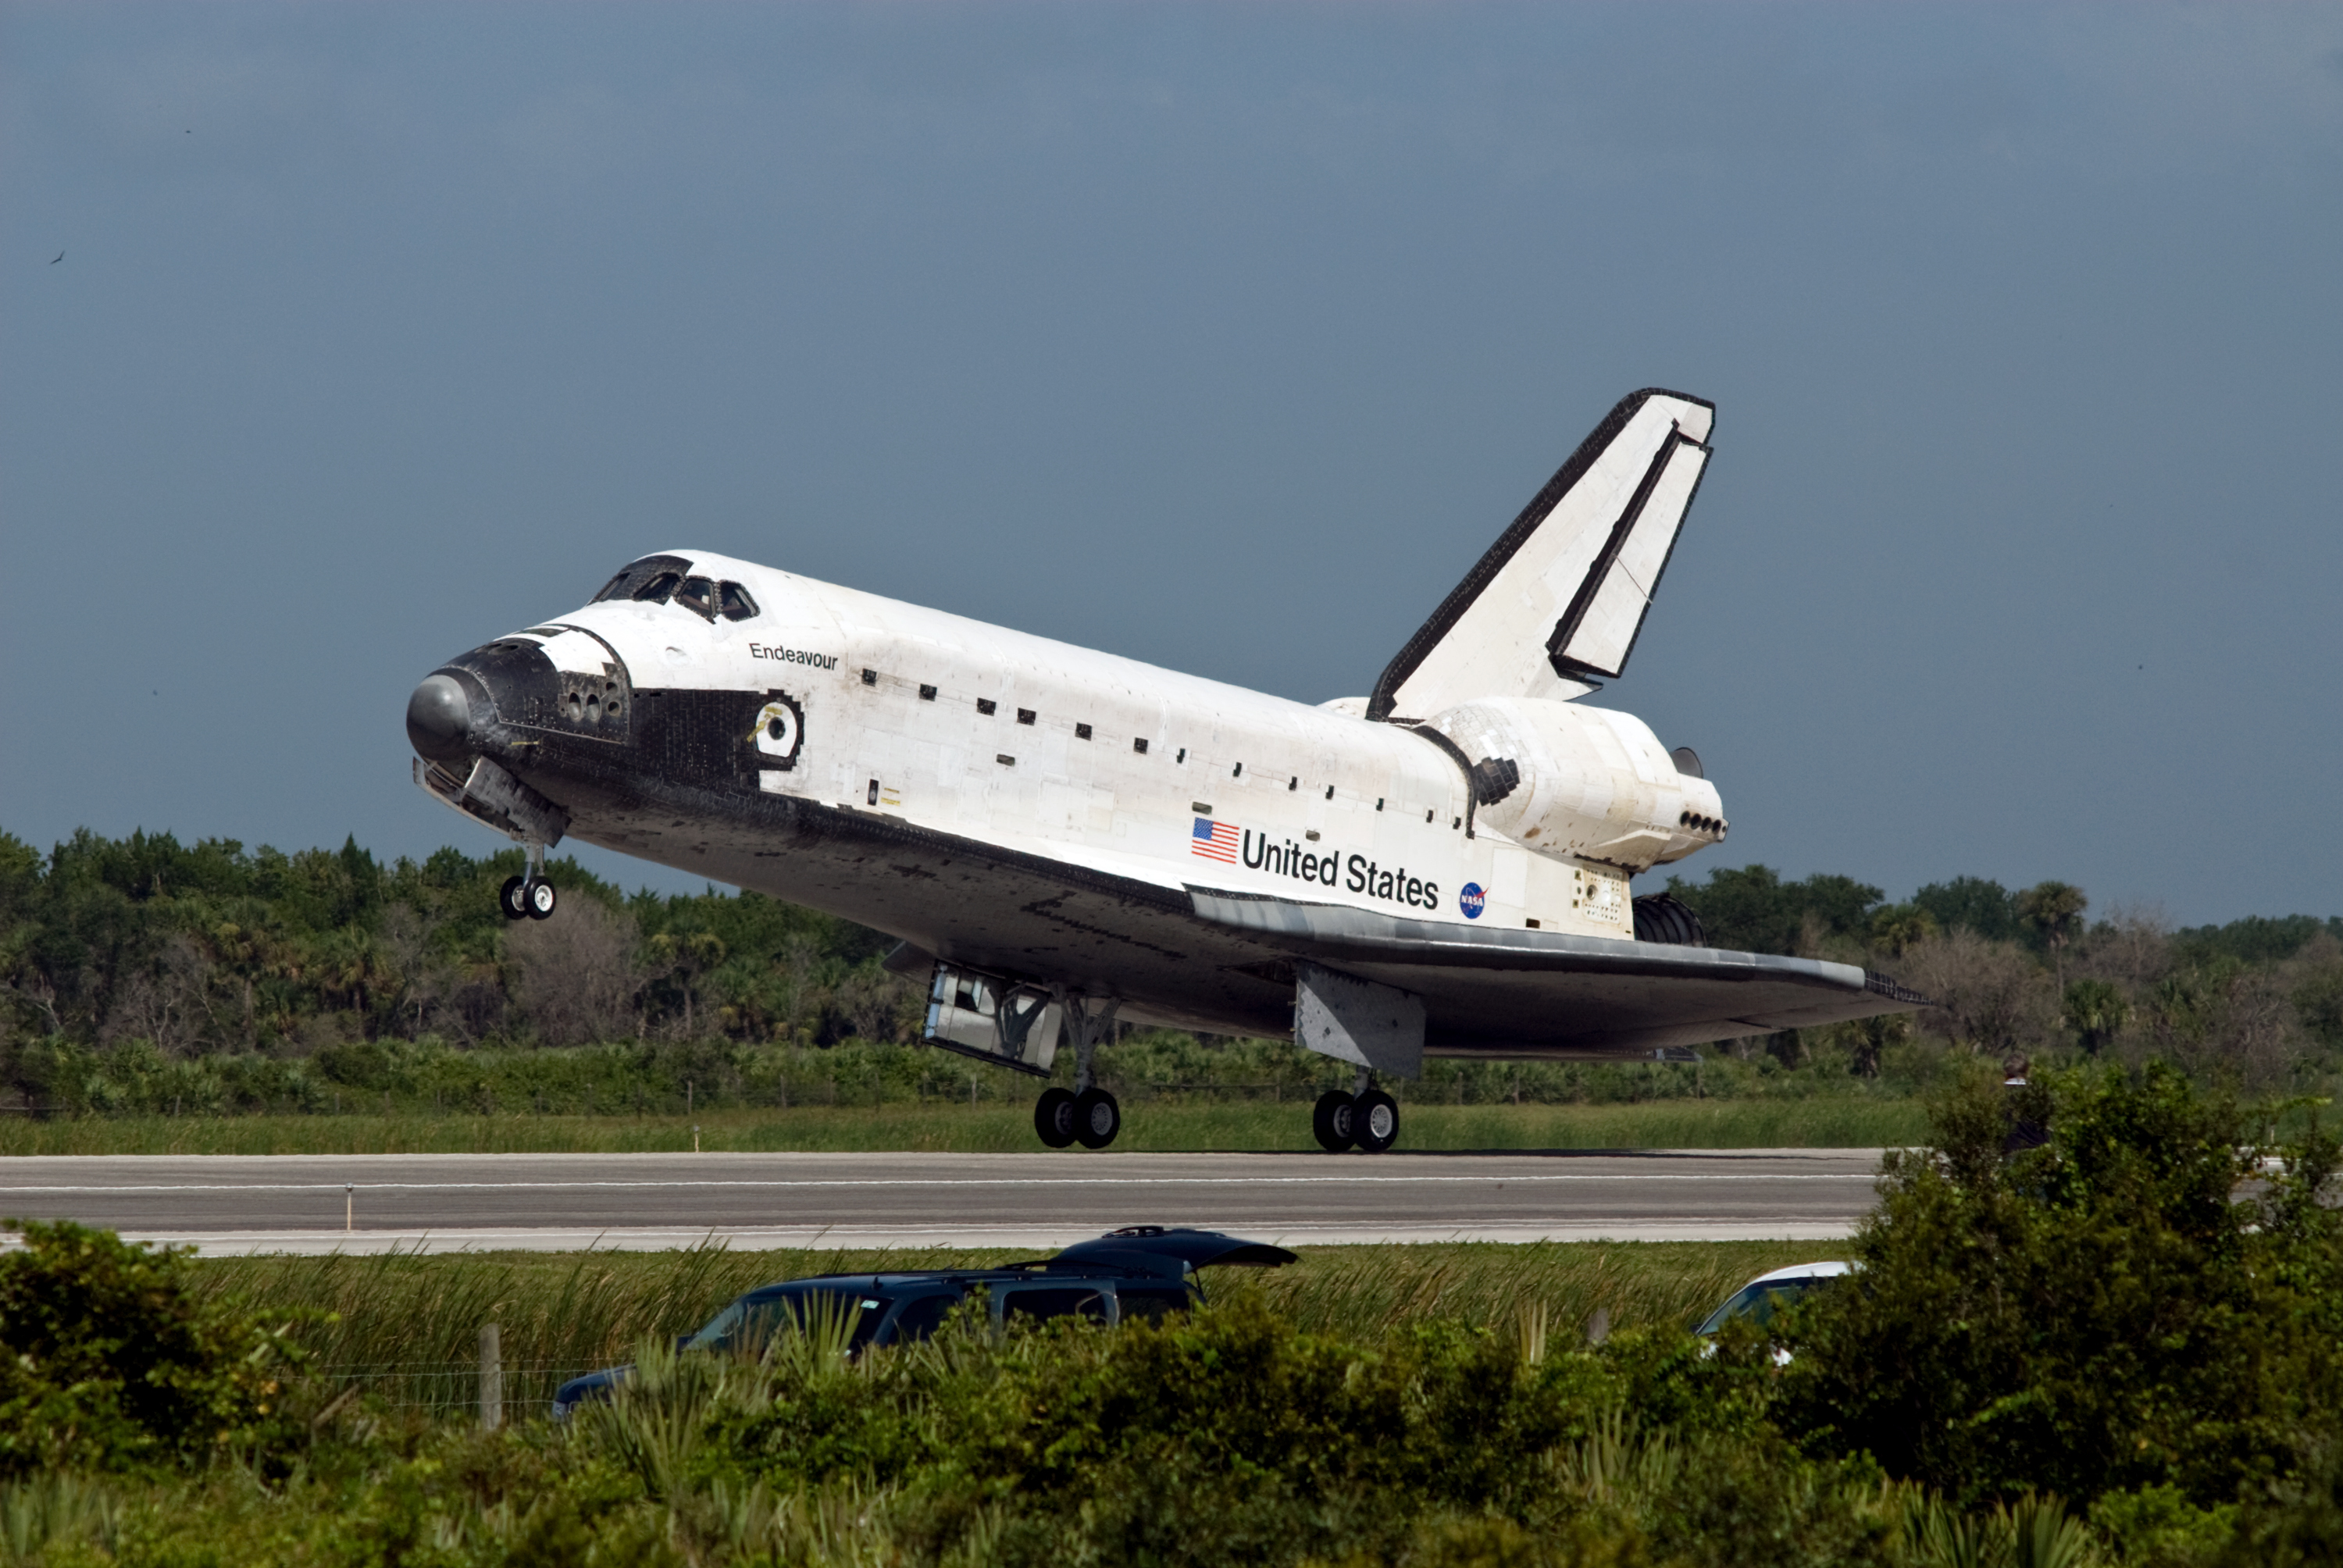 Space_Shuttle_Endeavour_Lands_at_the_Kennedy_Space_Center_on_July_31st,_2009.-1729365475.jpg